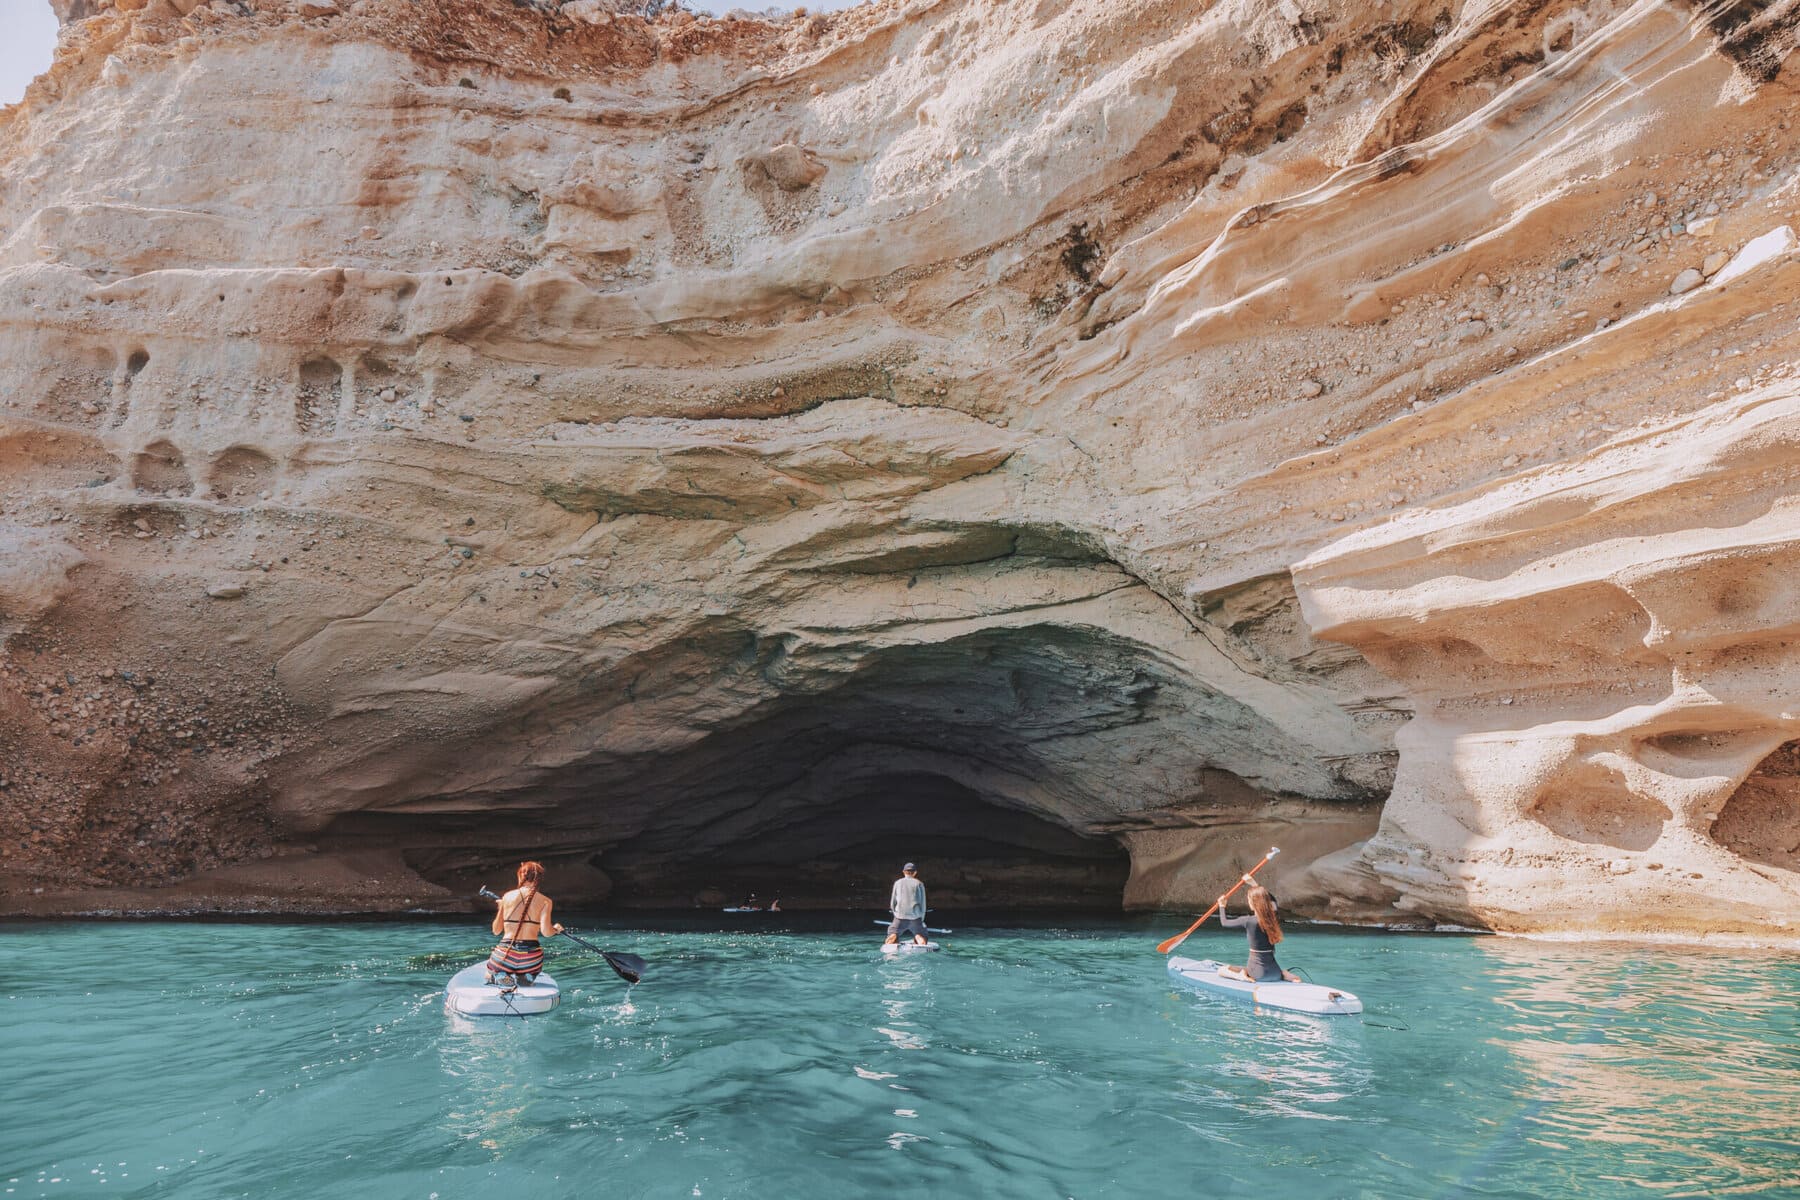 Things to Do in Algarve Portugal: An Adventure Seeker's Paradise